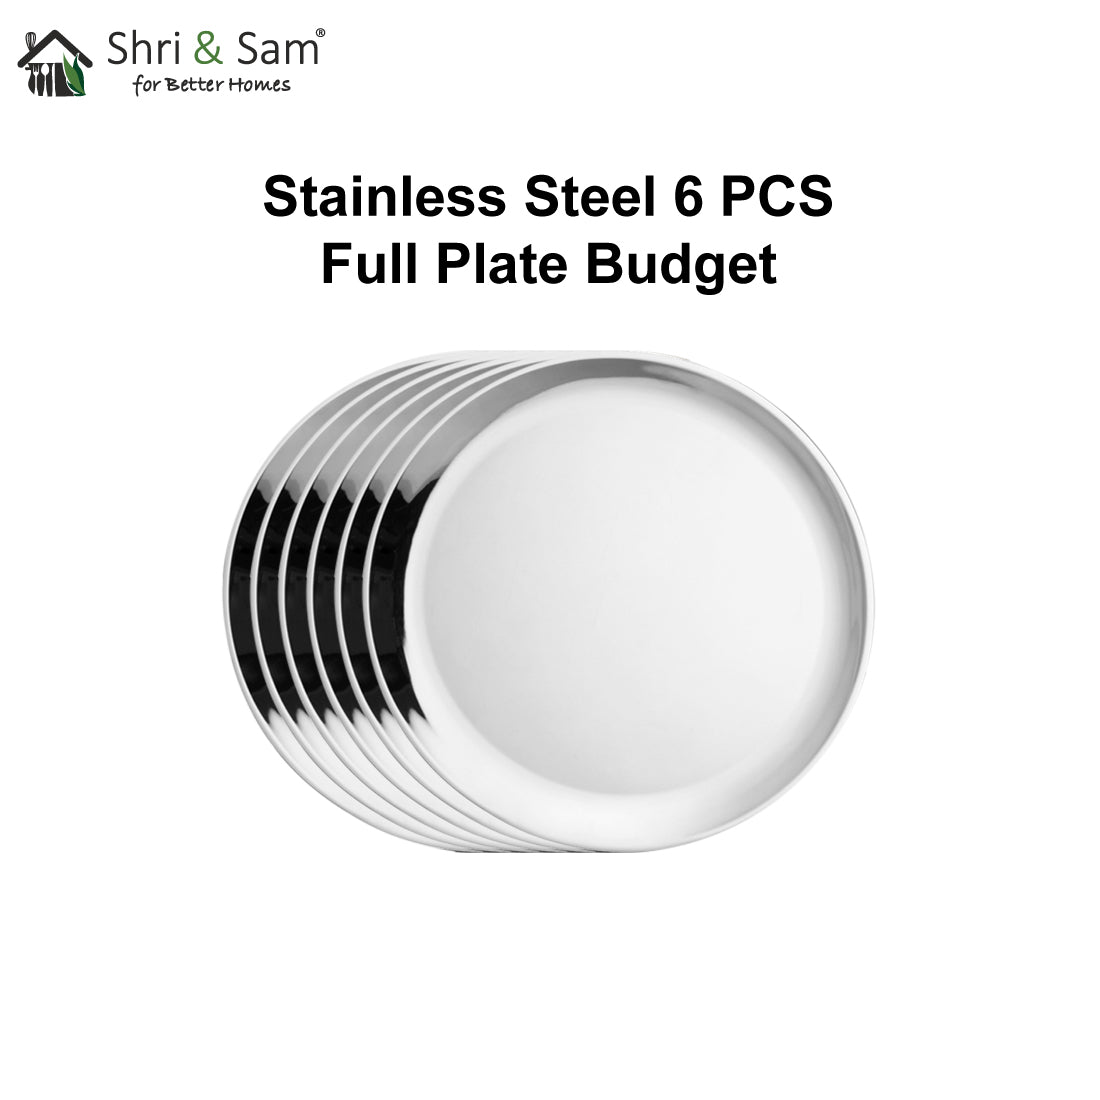 Stainless Steel 6 PCS Full Plate Budget